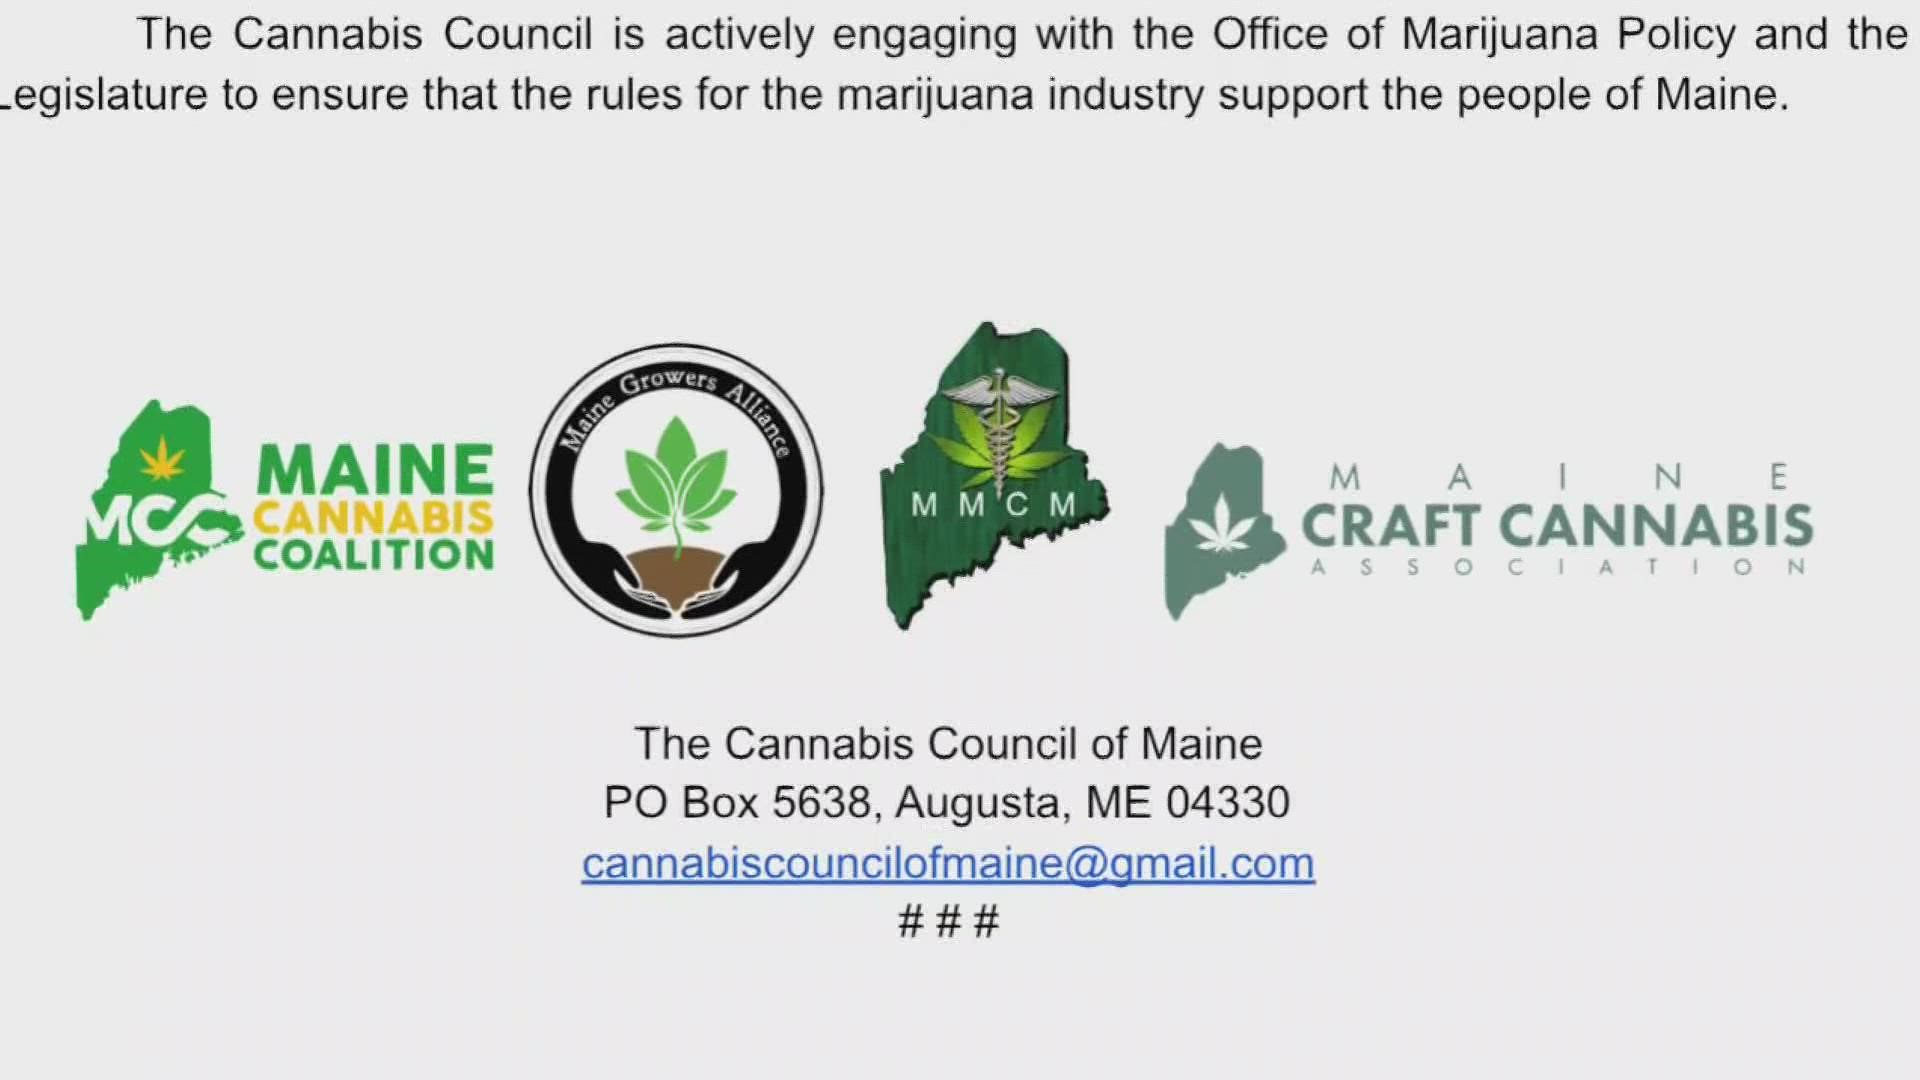 Leaders of Maine's cannabis industry are joining forces to make sure their voices are heard at the state house